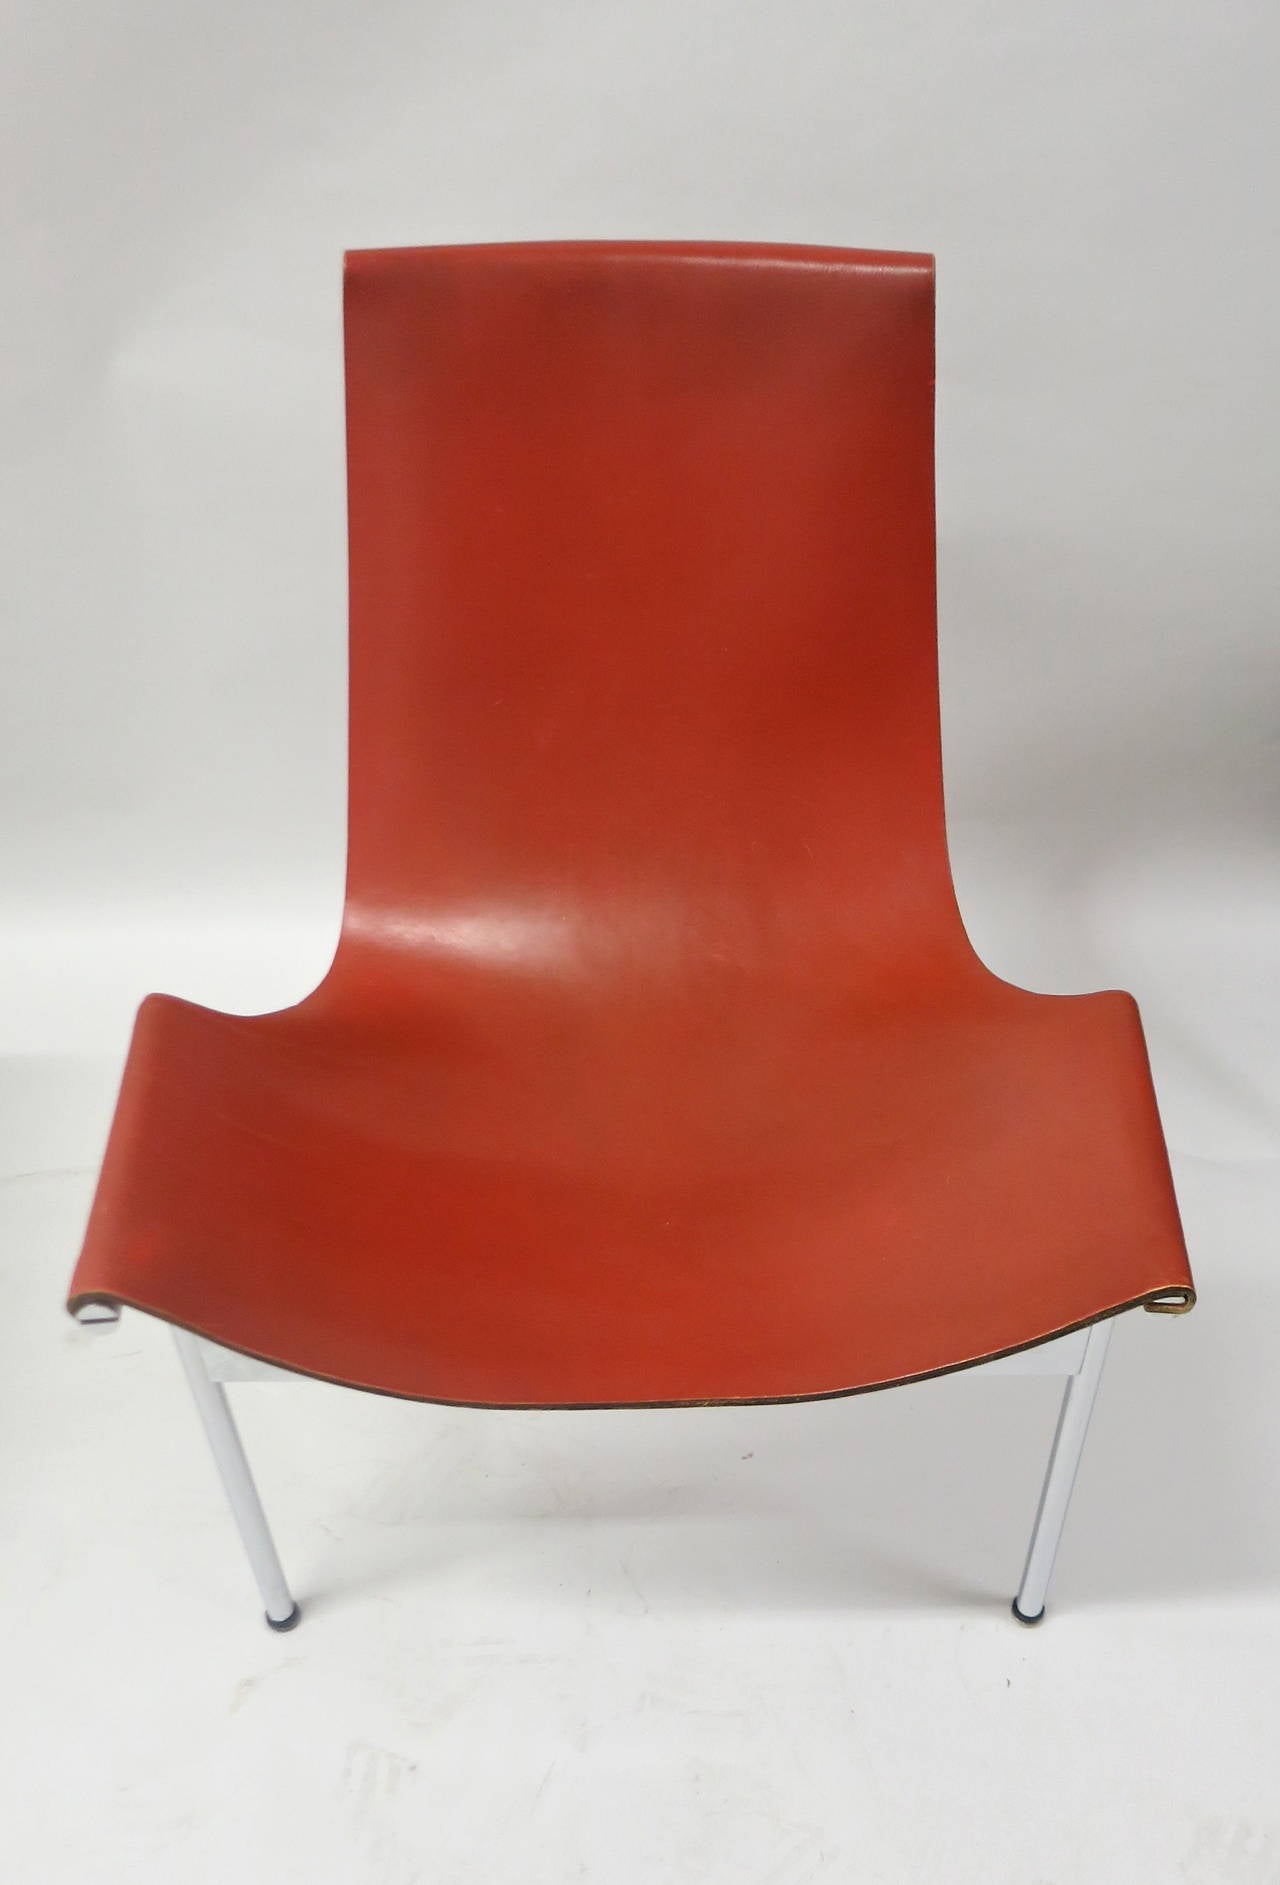 Rare set of ten T-chairs with special ordered leather backing in a matching tone as the front red-brown saddle leather. All have minimal wear and very careful use. The original condition is excellent and consistent on all ten. The